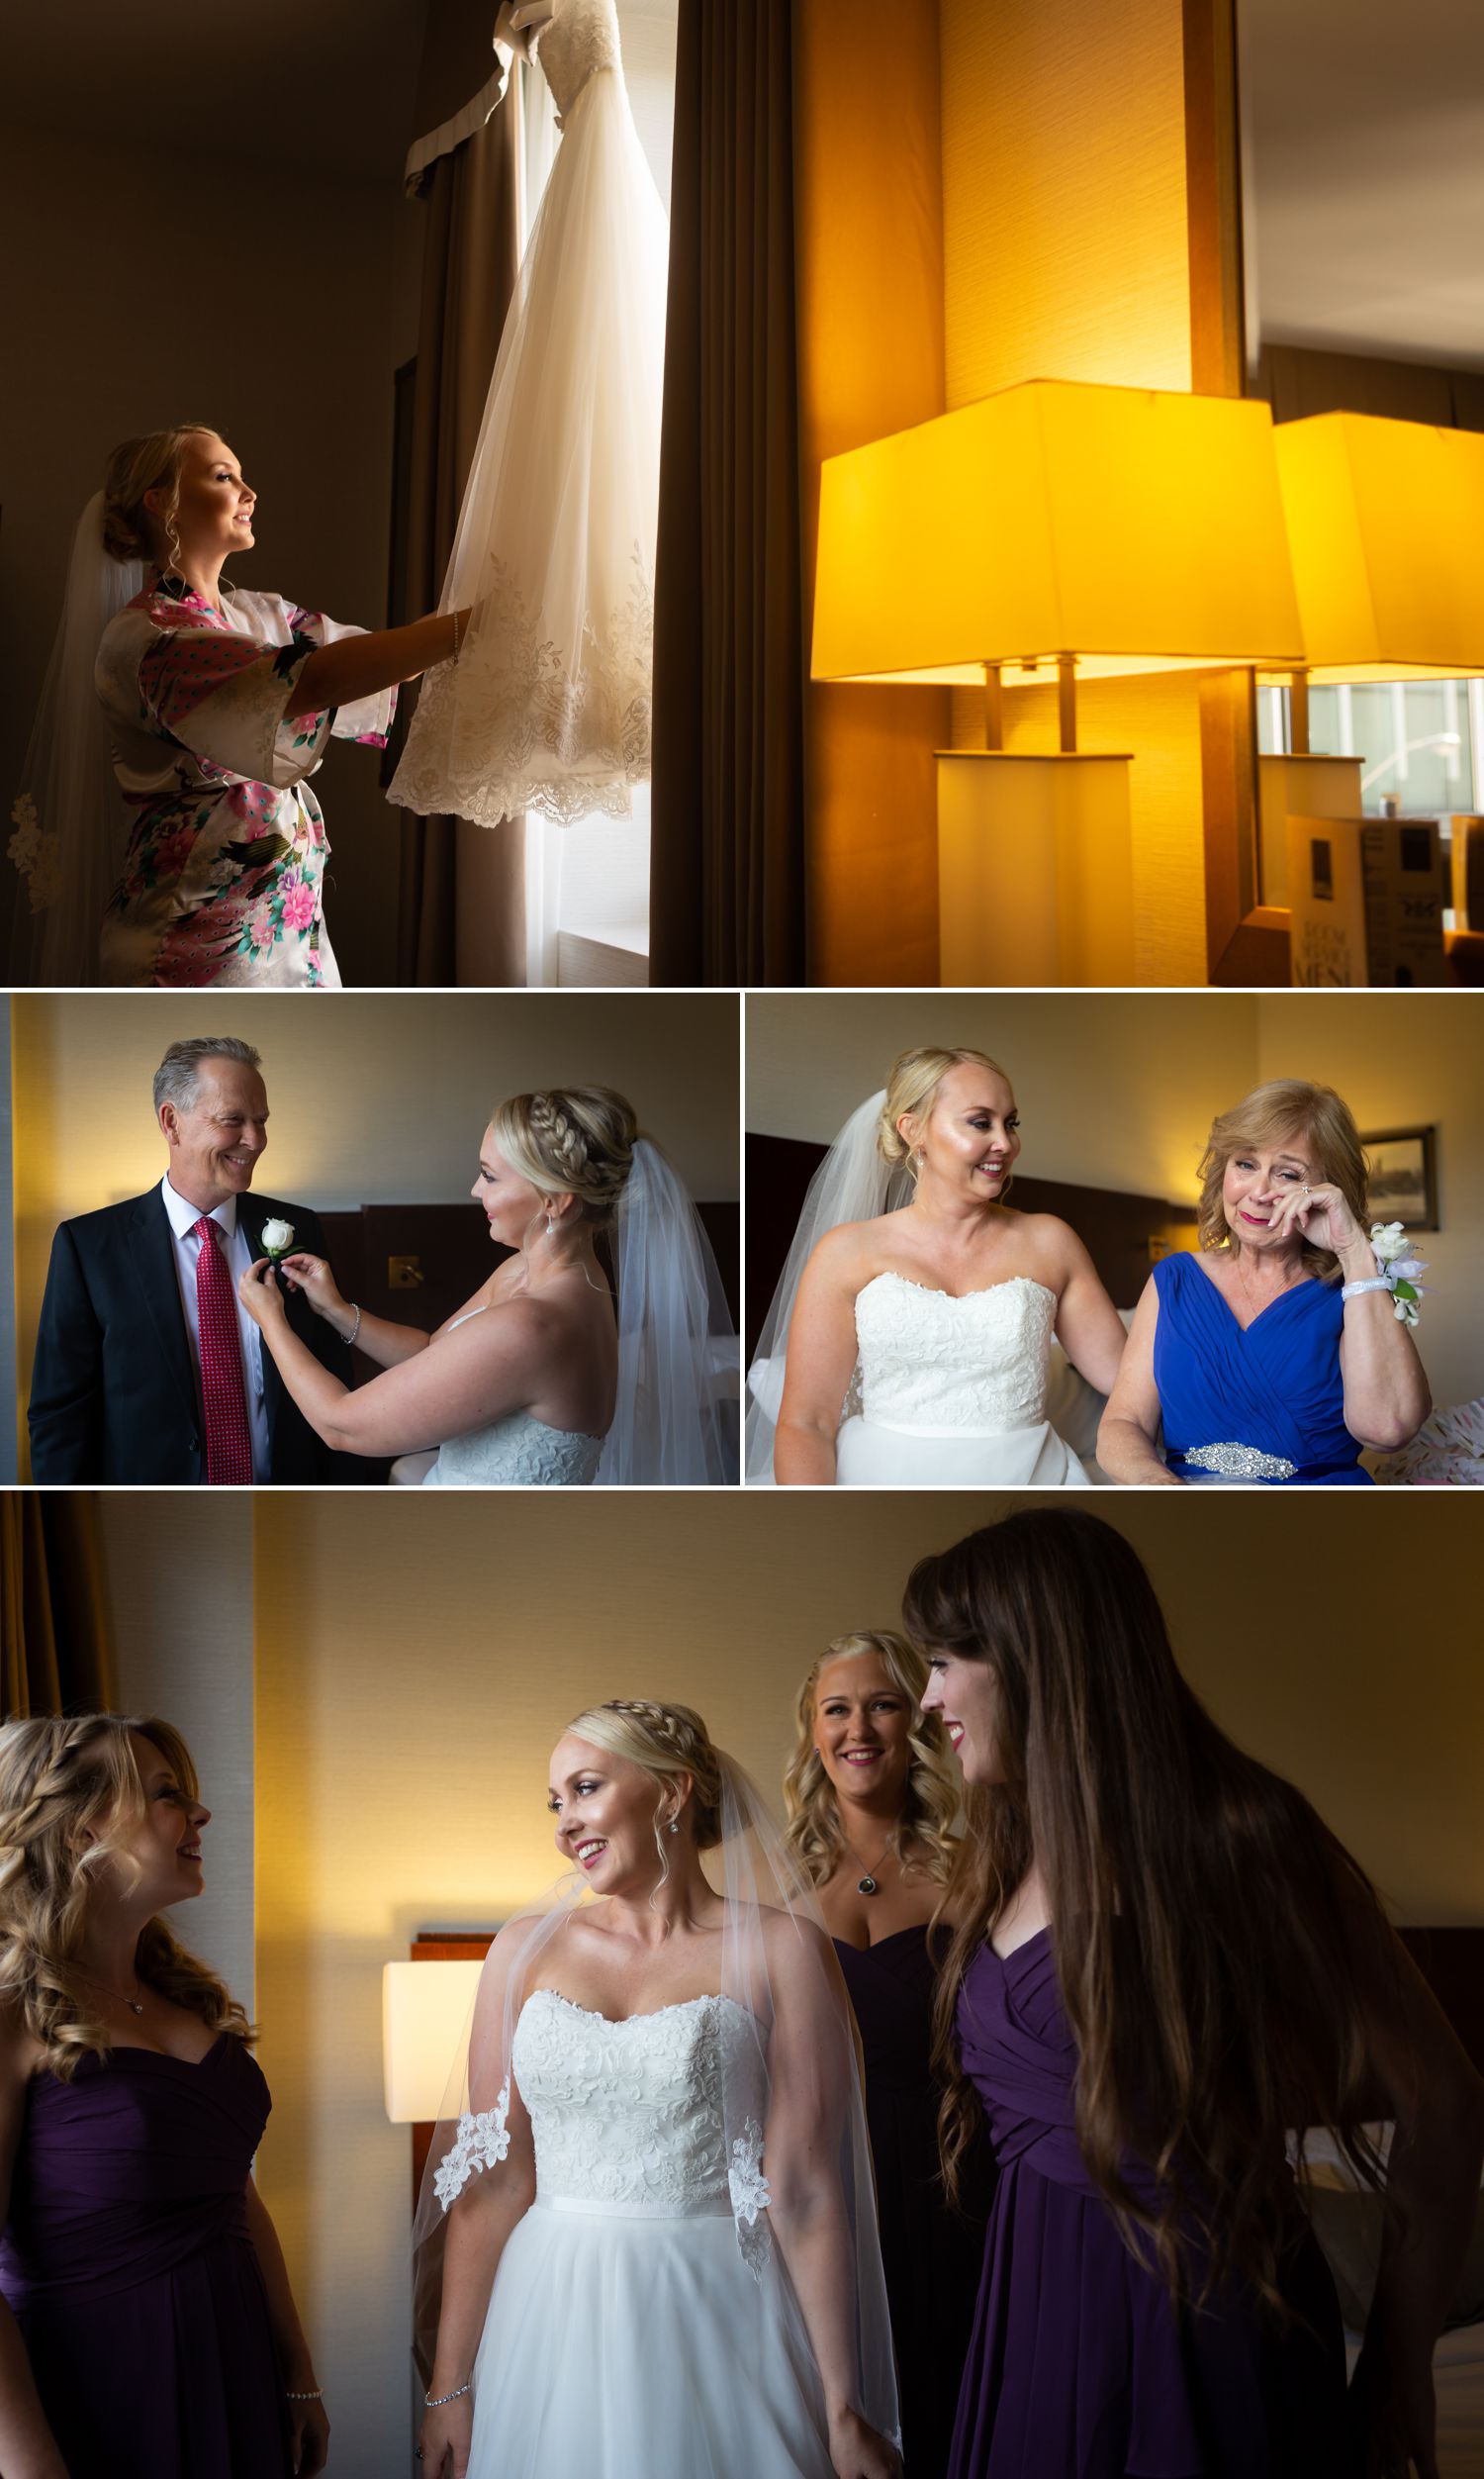 The bride getting ready with her friends and family at a hotel in downtown Ottawa